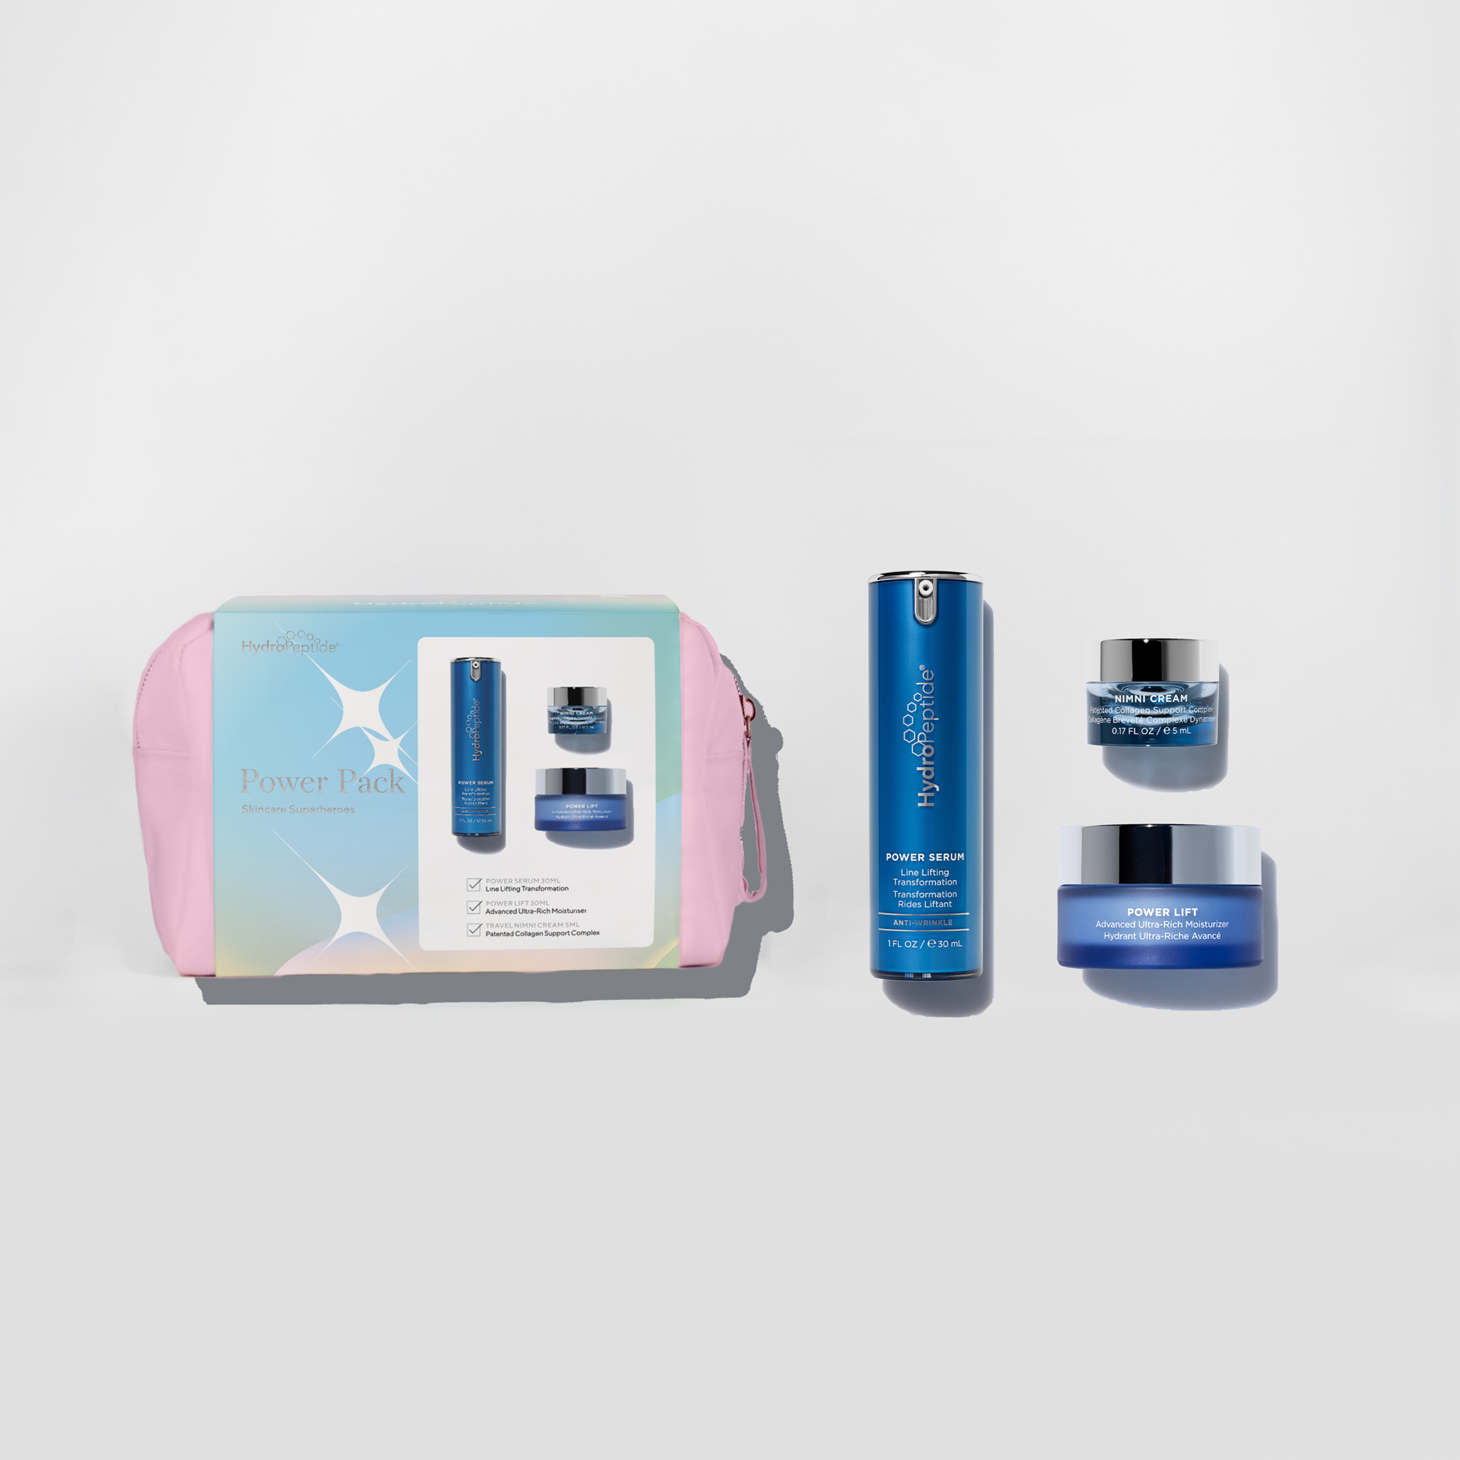 HydroPeptide Power Pack Limited Edition Pack